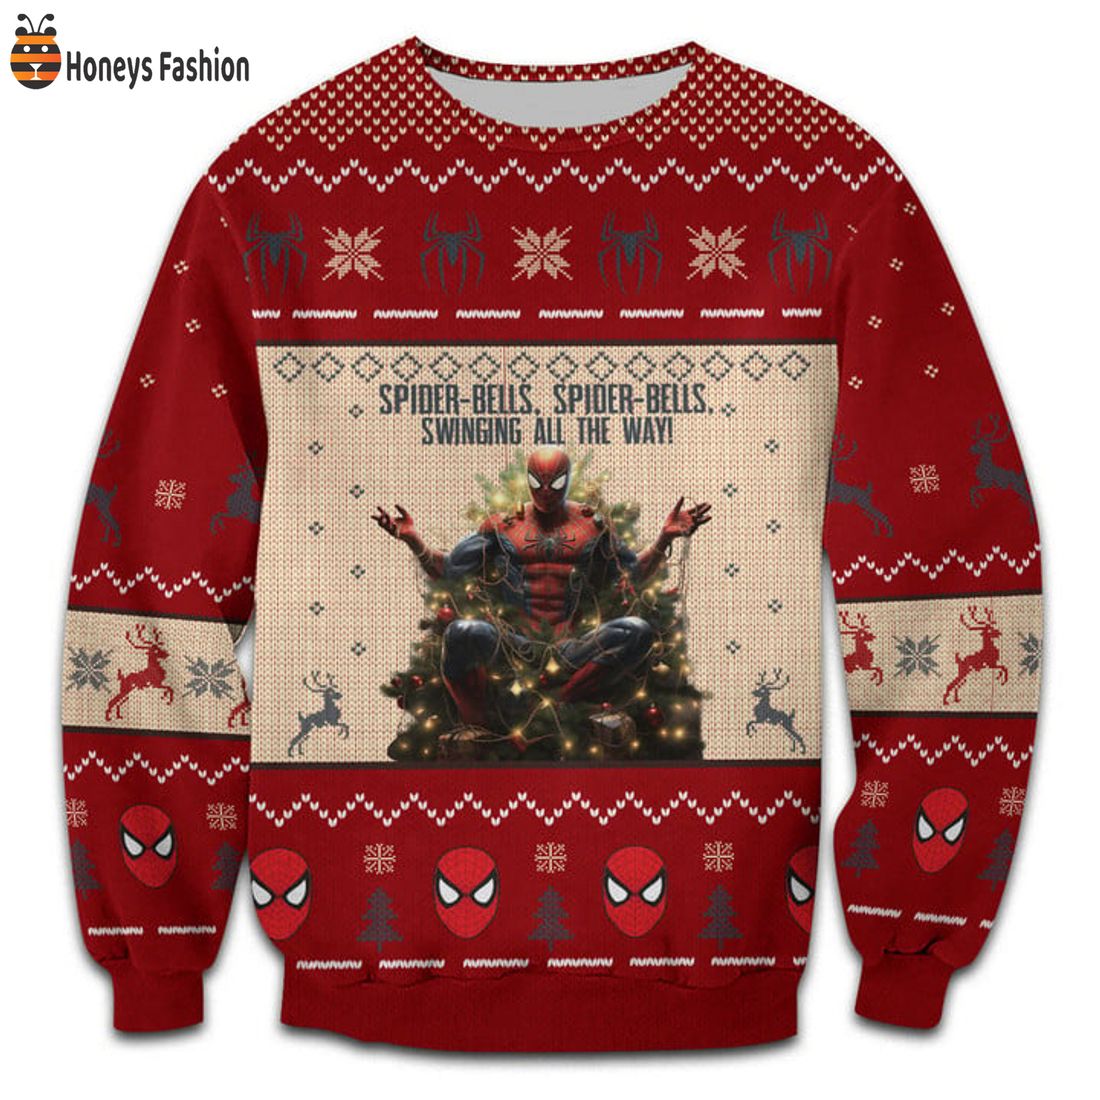 TRENDING Spider bells spider bells swinging all the way ugly christmas sweater